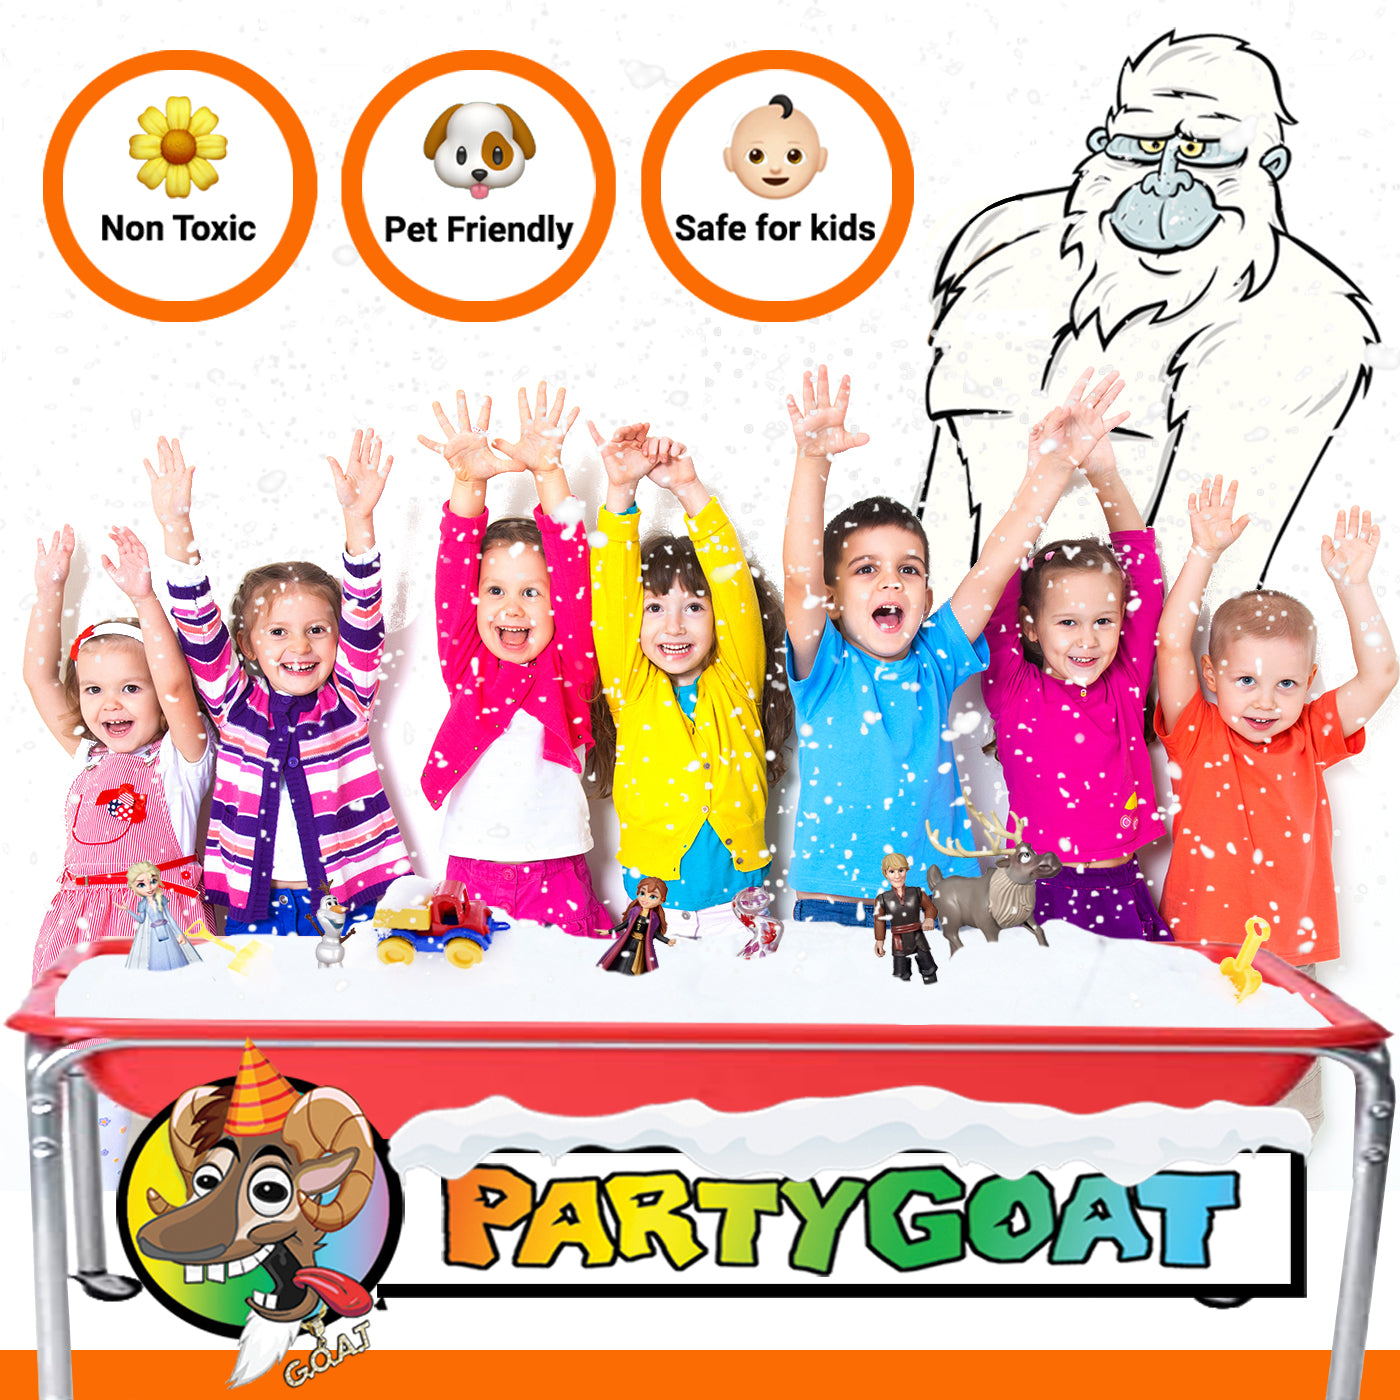 instant-snow-for-kids-playing-with-fake-snow-on-sensory-table-artificial-snow